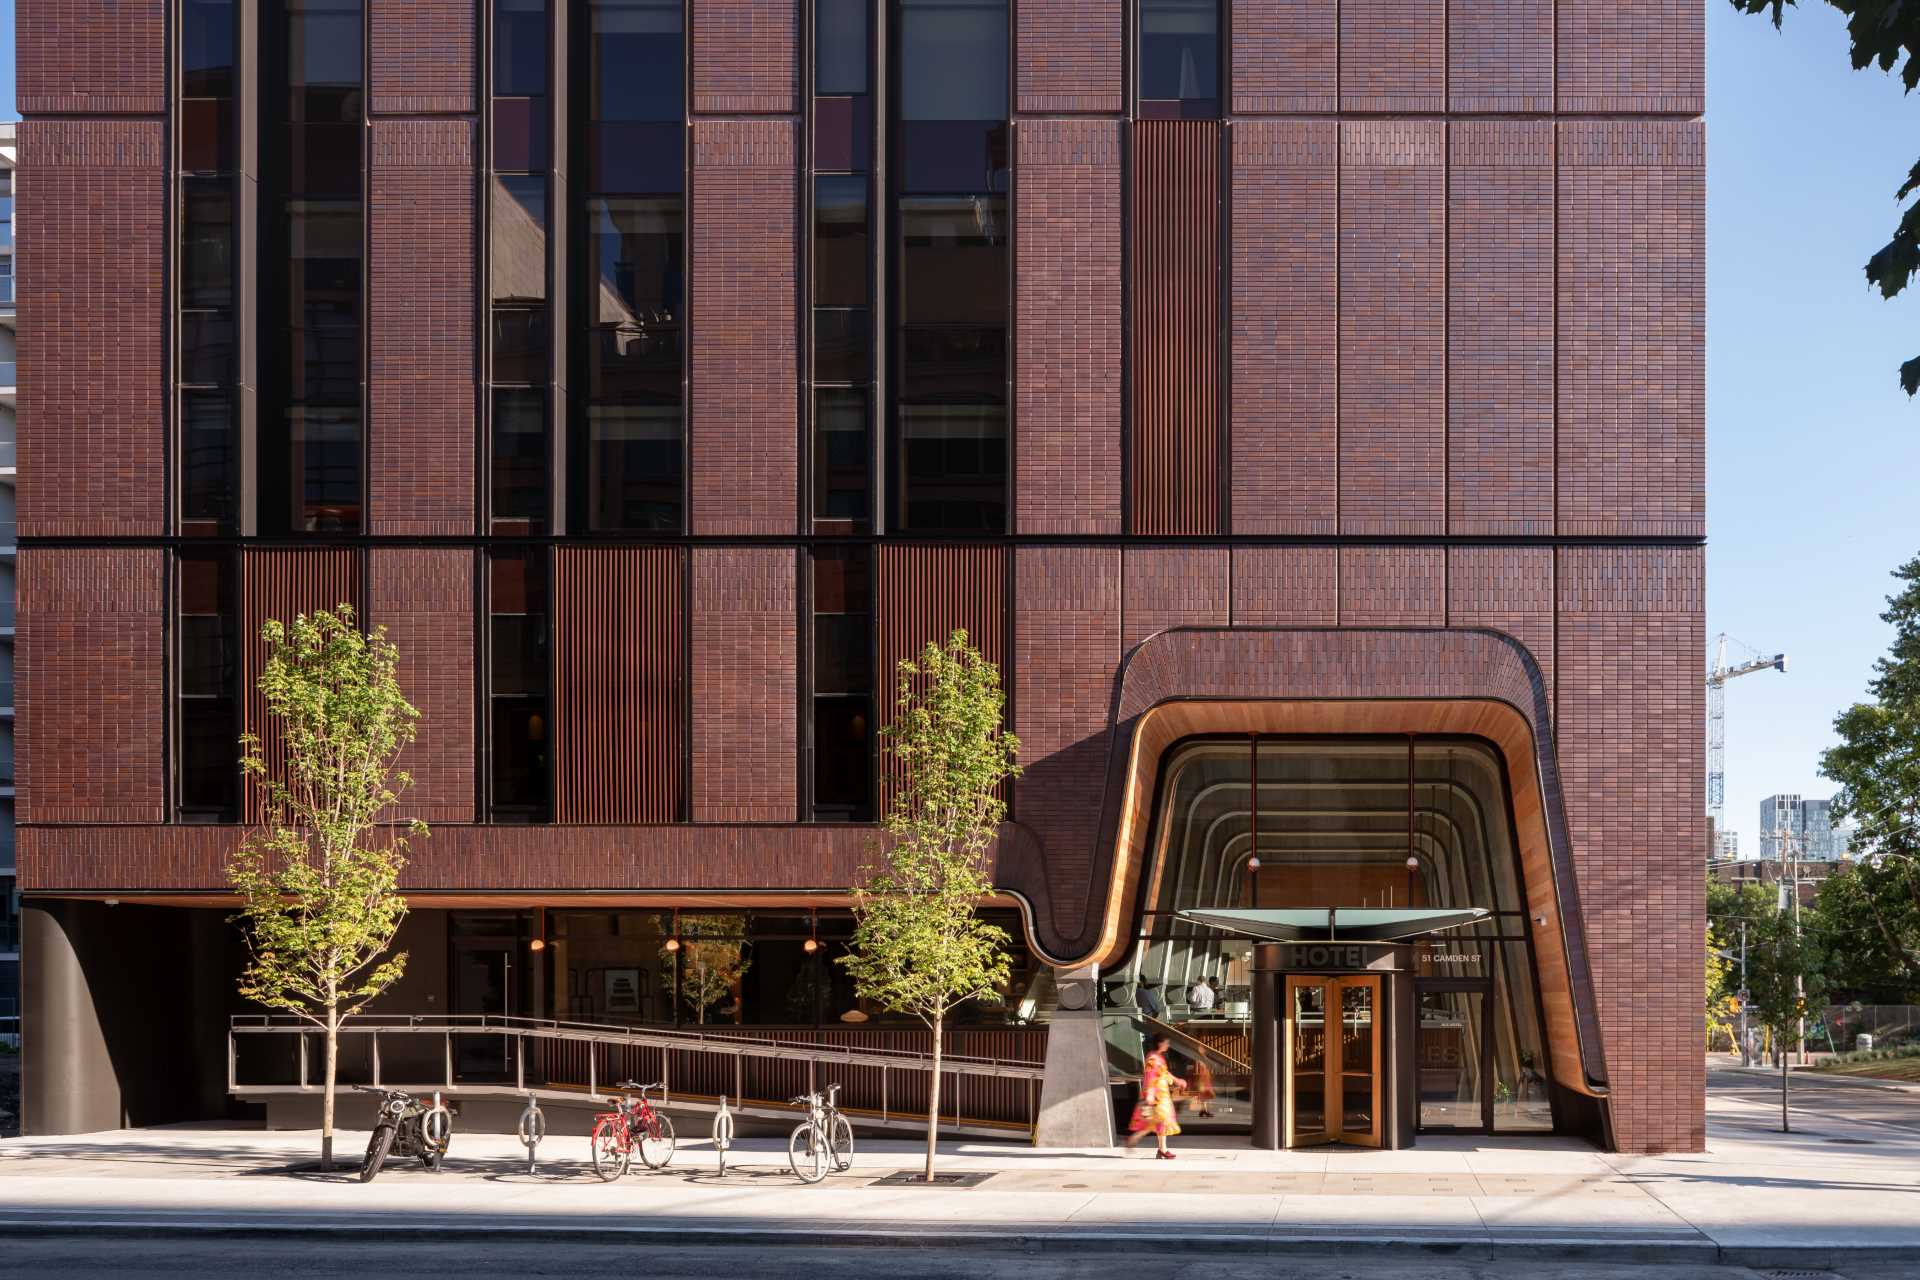 The Ace Hotel in Toronto has patterned red brick exterior with a uniquely shaped opening.